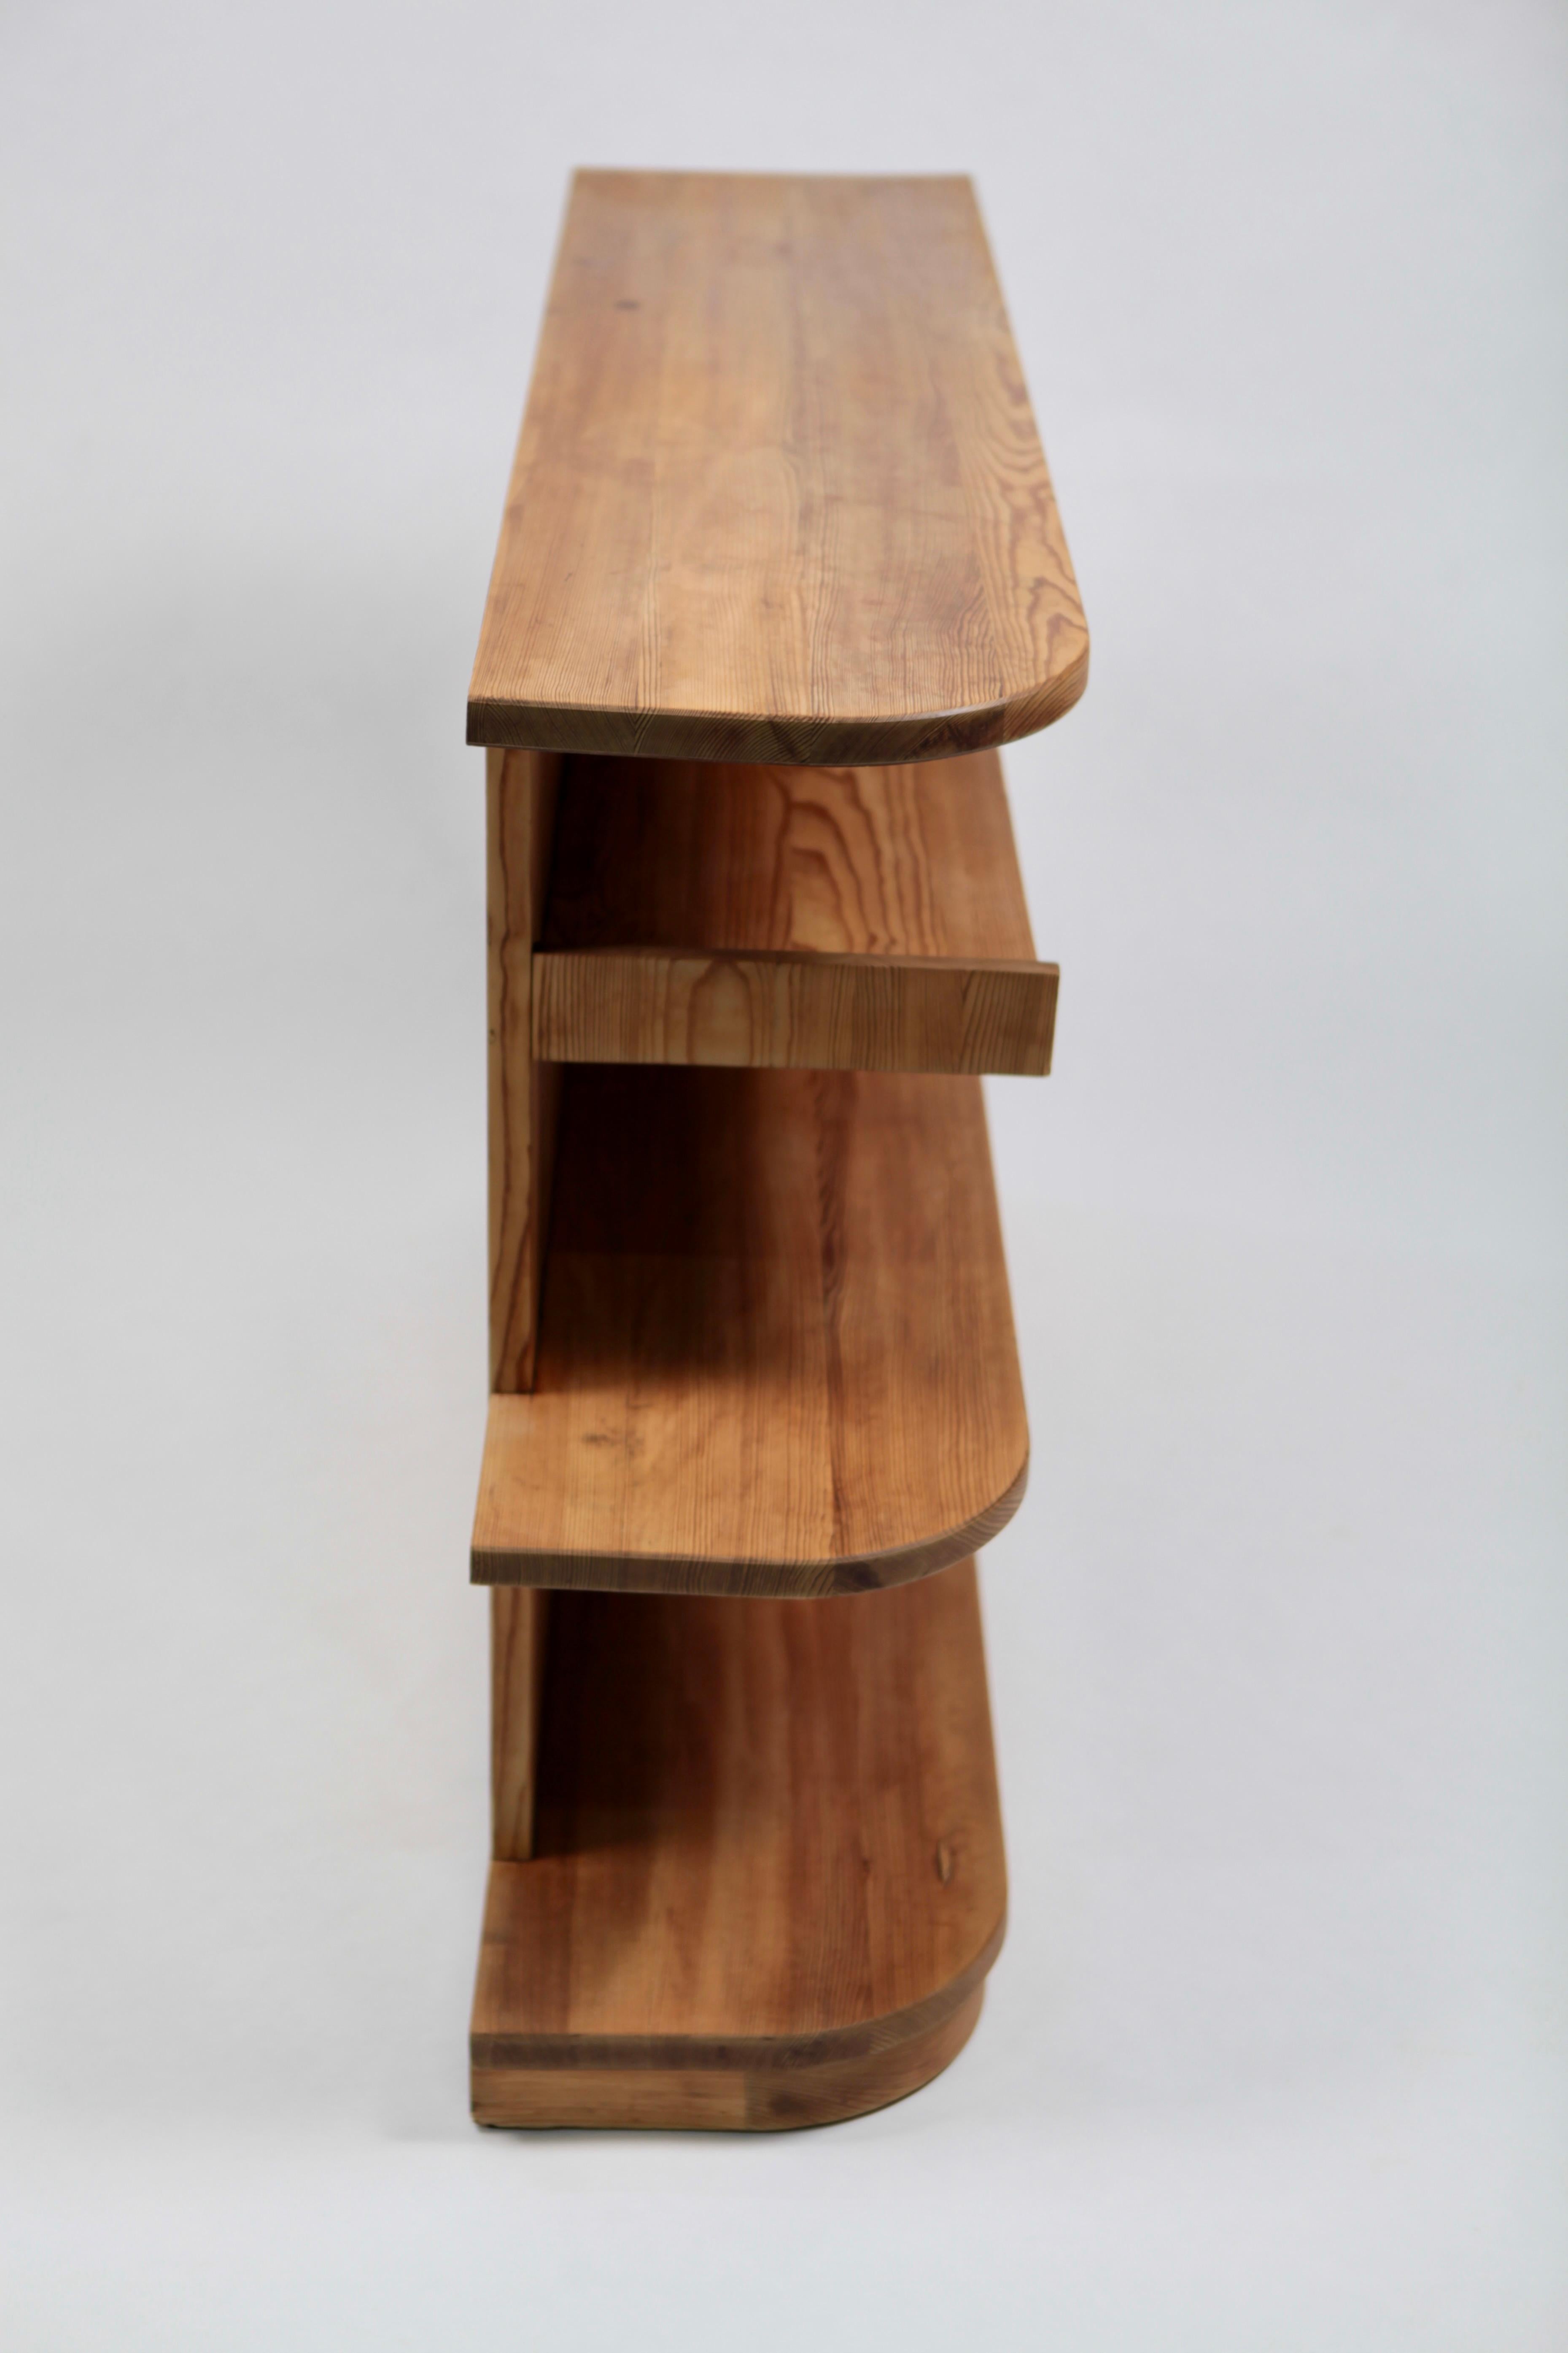 Axel Einar Hjorth, 'Lovö' Bookcase, Acid Stained Pine, Executed by NK in 1939 3